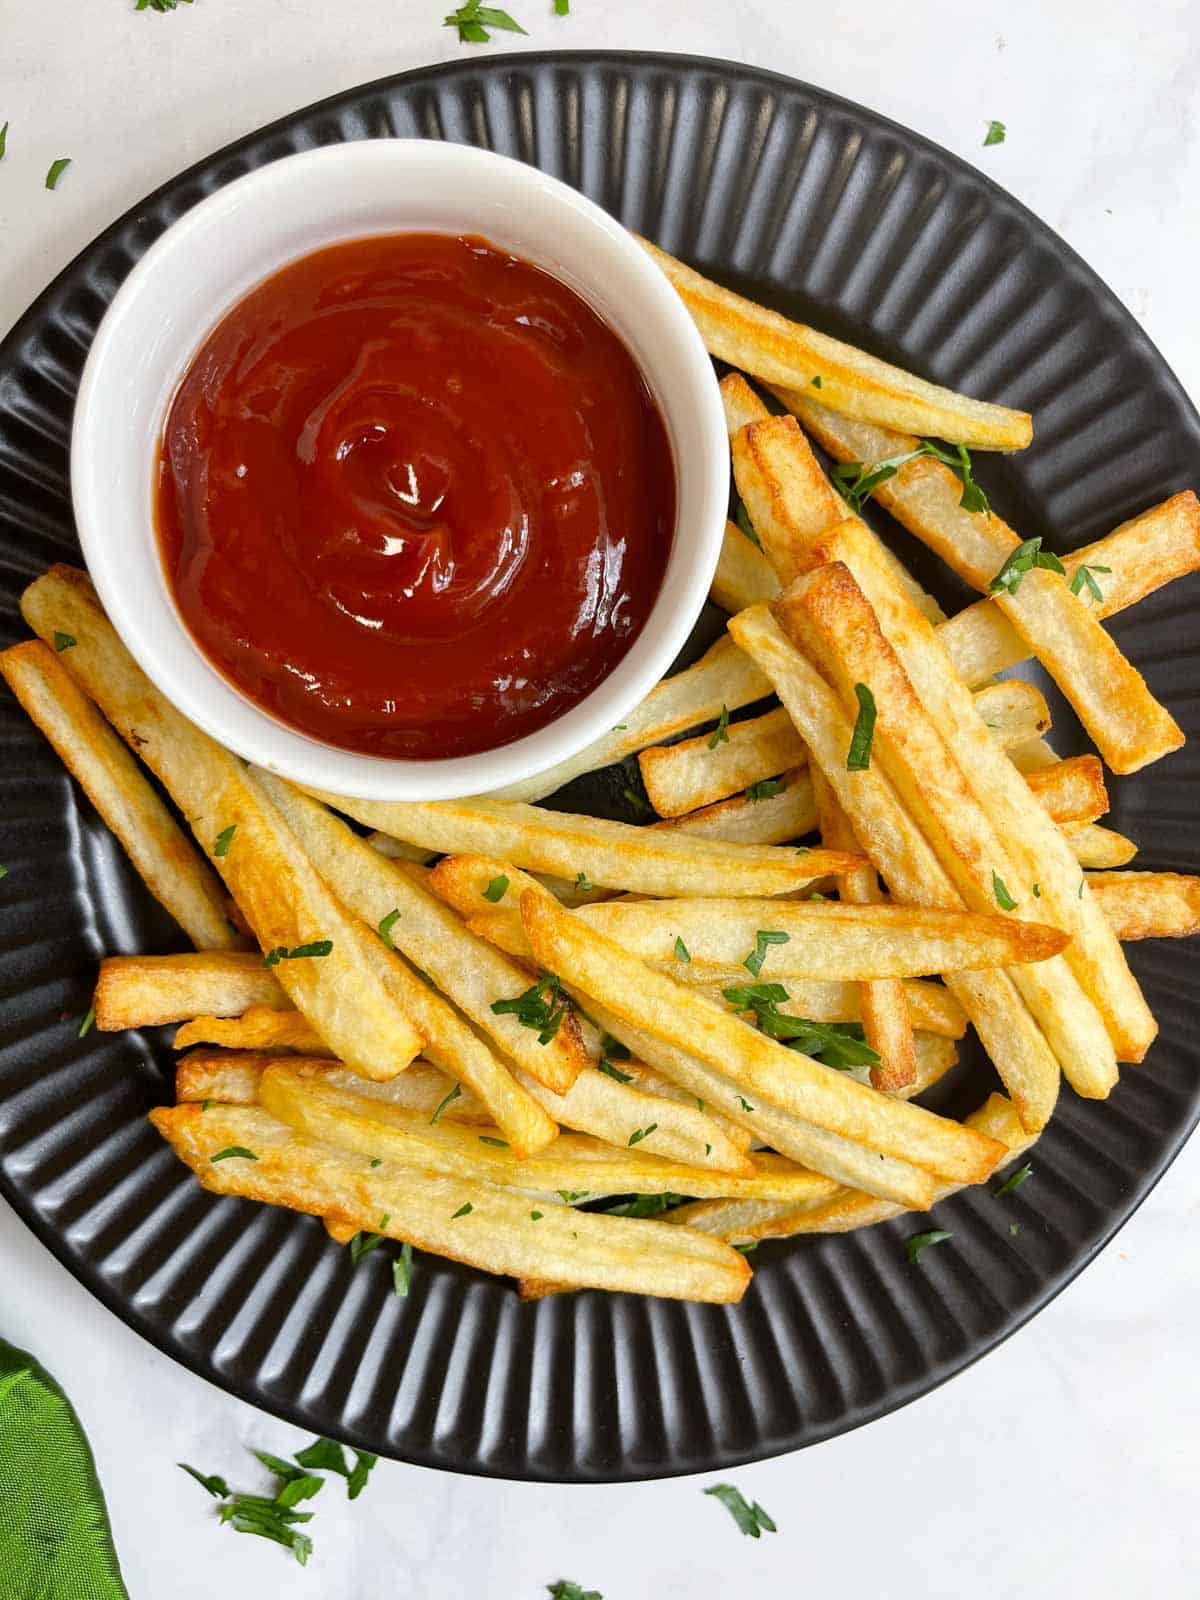 potato french fries made in air frier served on a plate with tomato ketchup